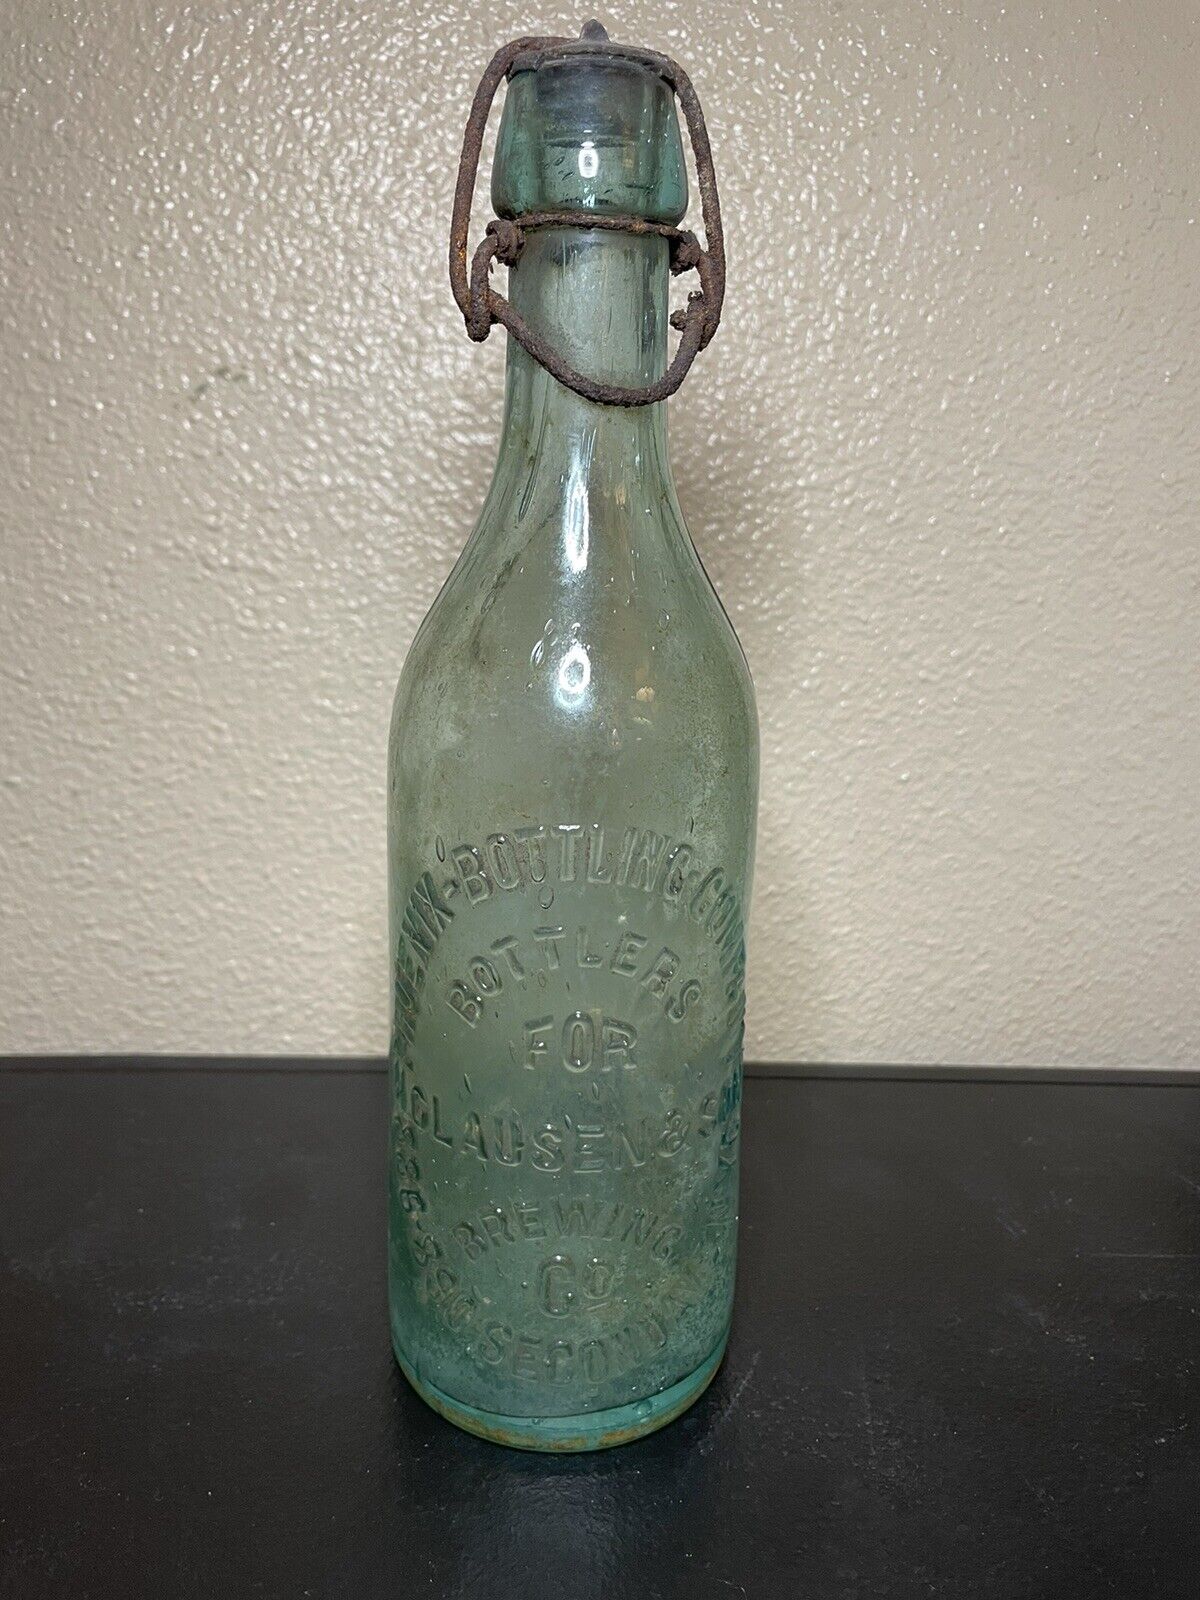 Very Rare 1890 H CLAUSEN & SON EMBOSSED BEER BOTTLE 886 - 890 Second Ave NYC